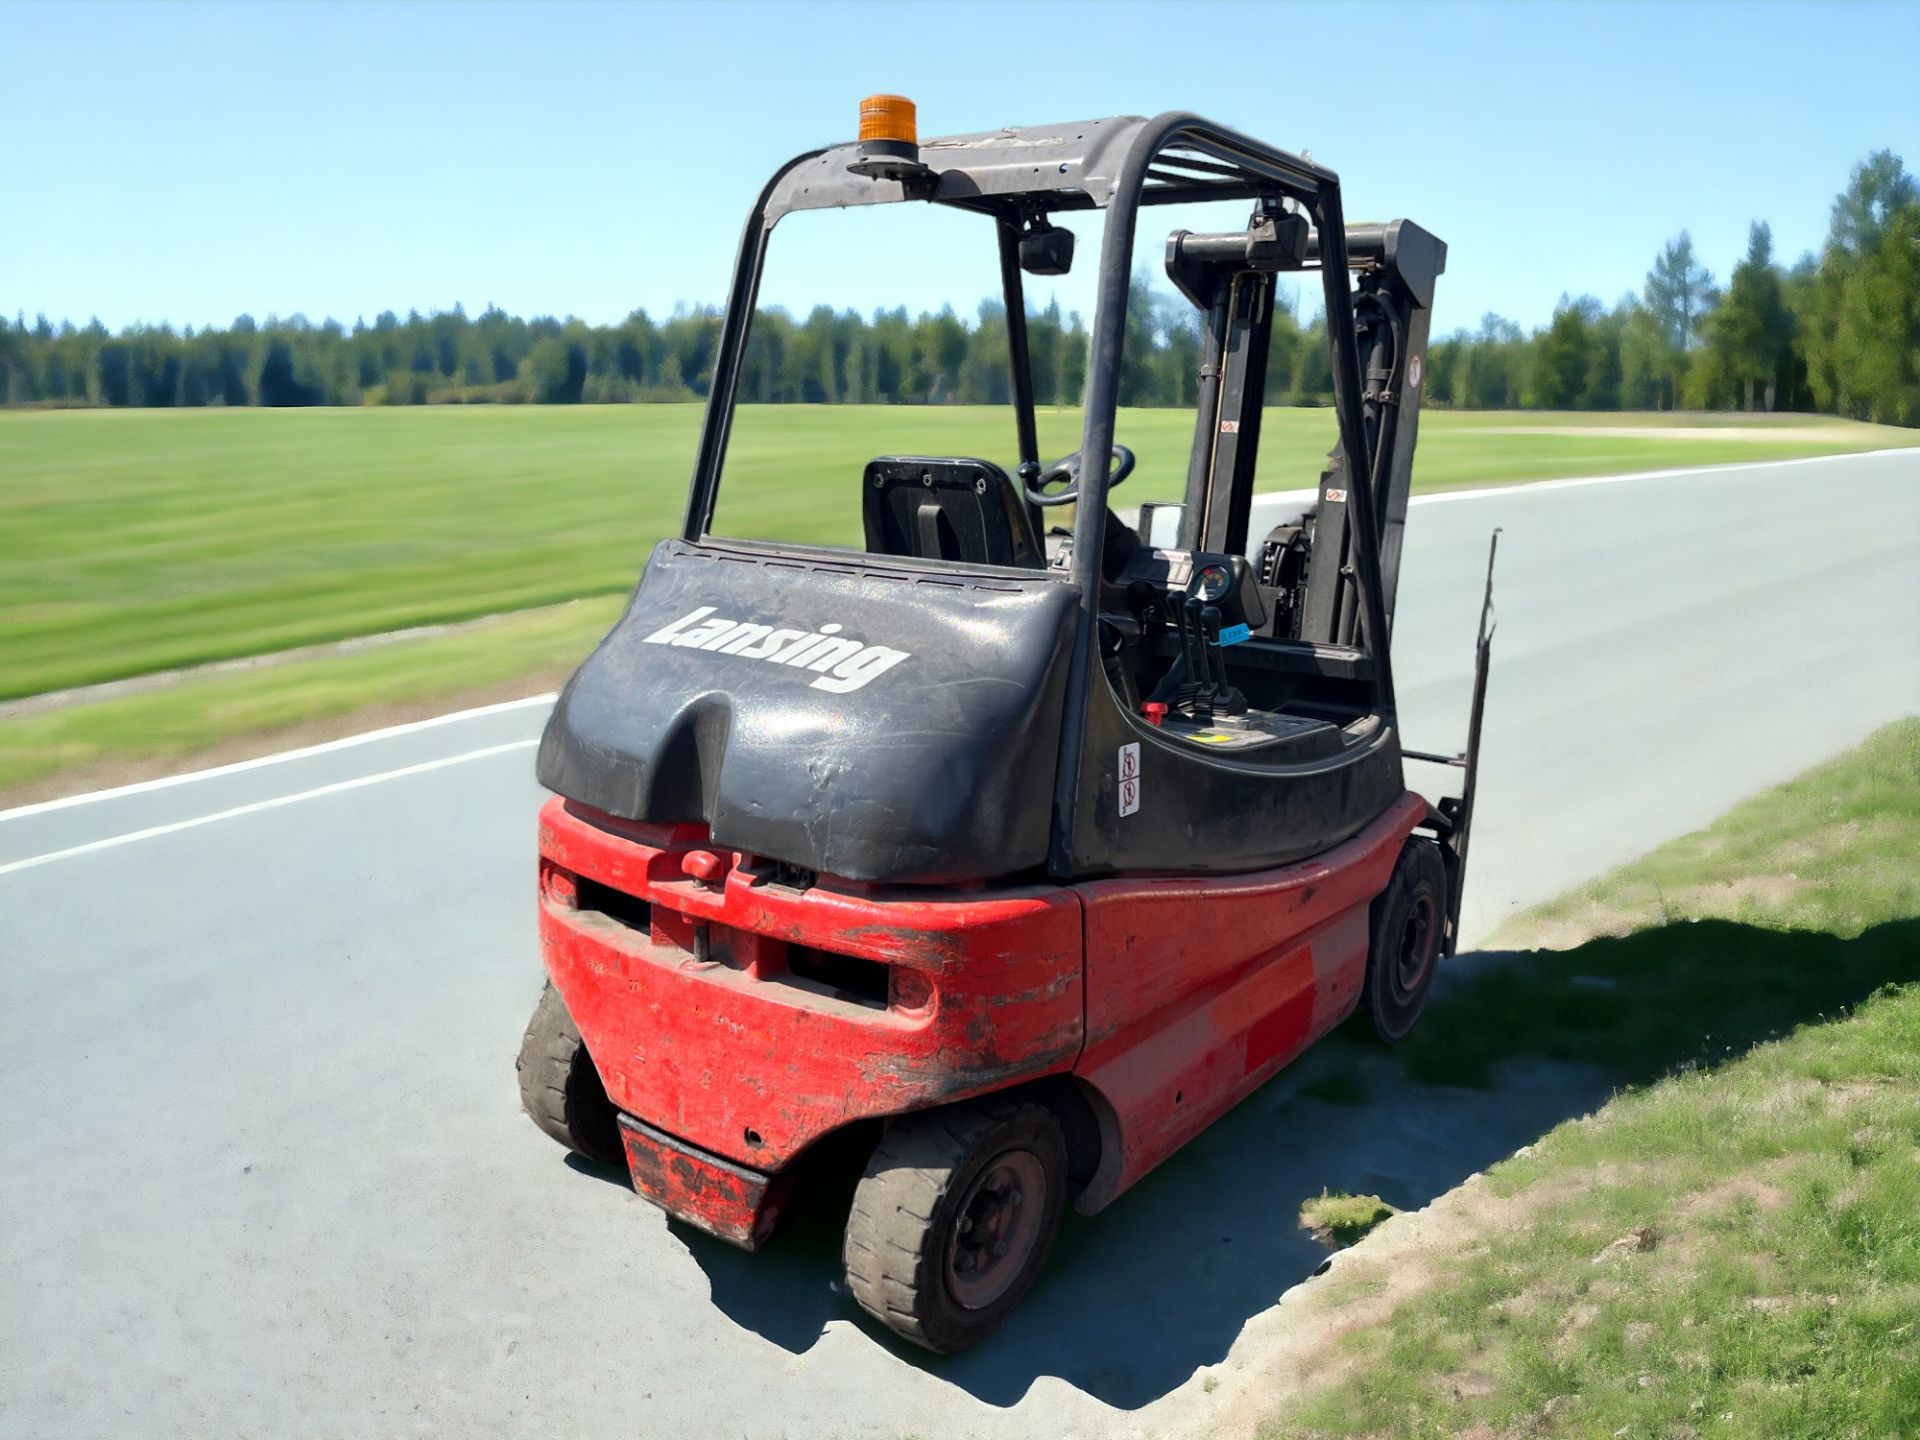 LINDE ELECTRIC 4-WHEEL FORKLIFT - E25-01 (1996) **(INCLUDES CHARGER)** - Image 4 of 6